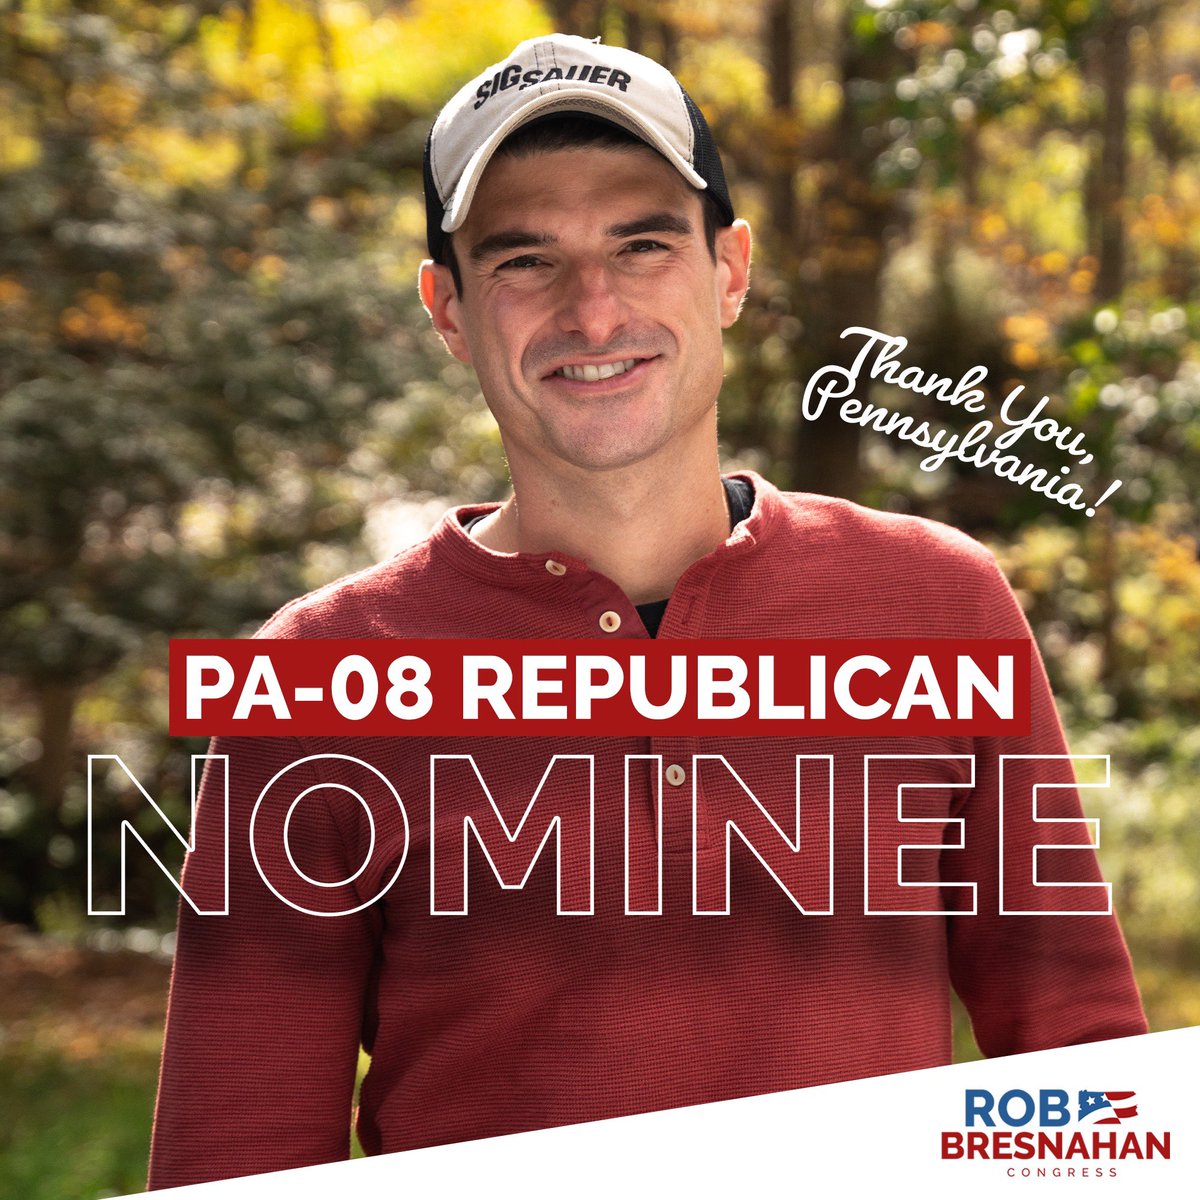 I am beyond humbled that the Republican voters of #PA08 have put their trust in me to represent them in Congress. We’re going to win this race in November. We’re going to replace Cartwright’s open borders with a secure border. Replace his historic inflation with a booming…